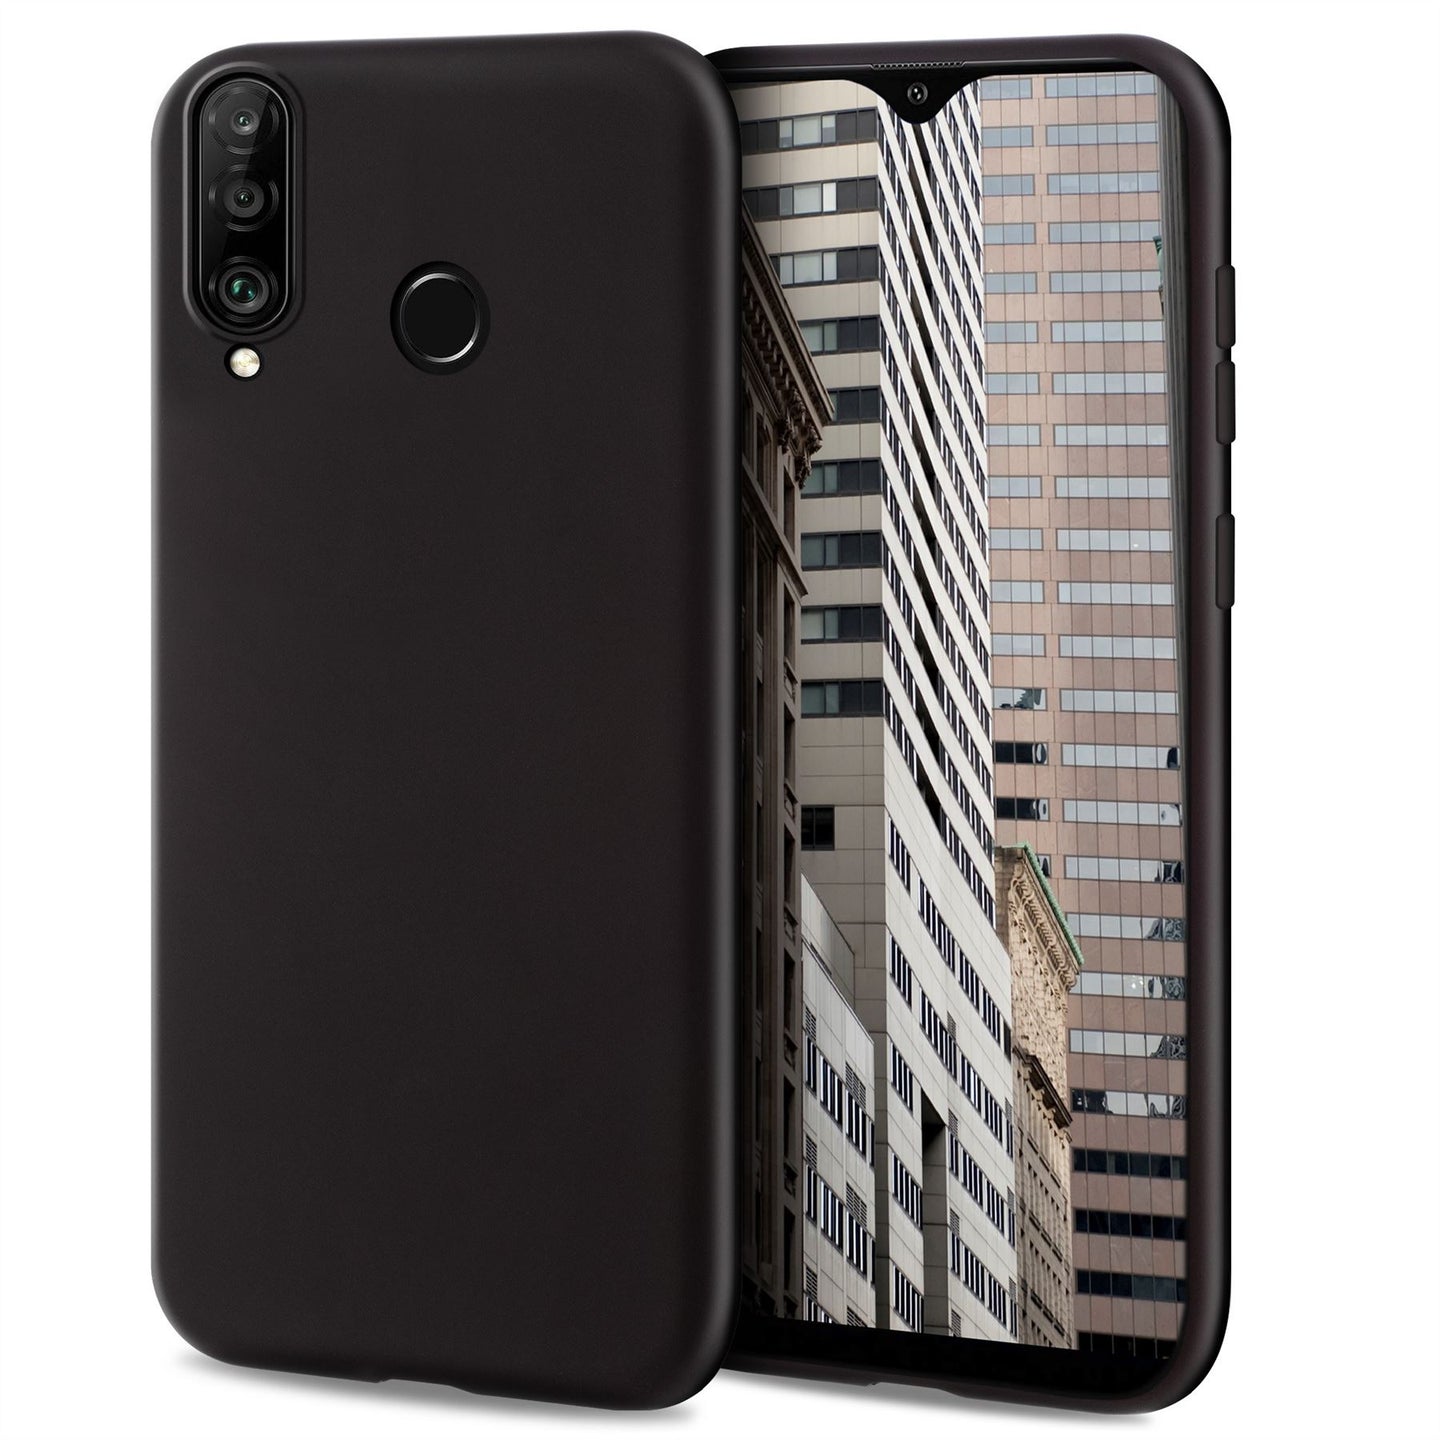 Moozy Lifestyle. Designed for Huawei P30 Lite Case, Black - Liquid Silicone Cover with Matte Finish and Soft Microfiber Lining